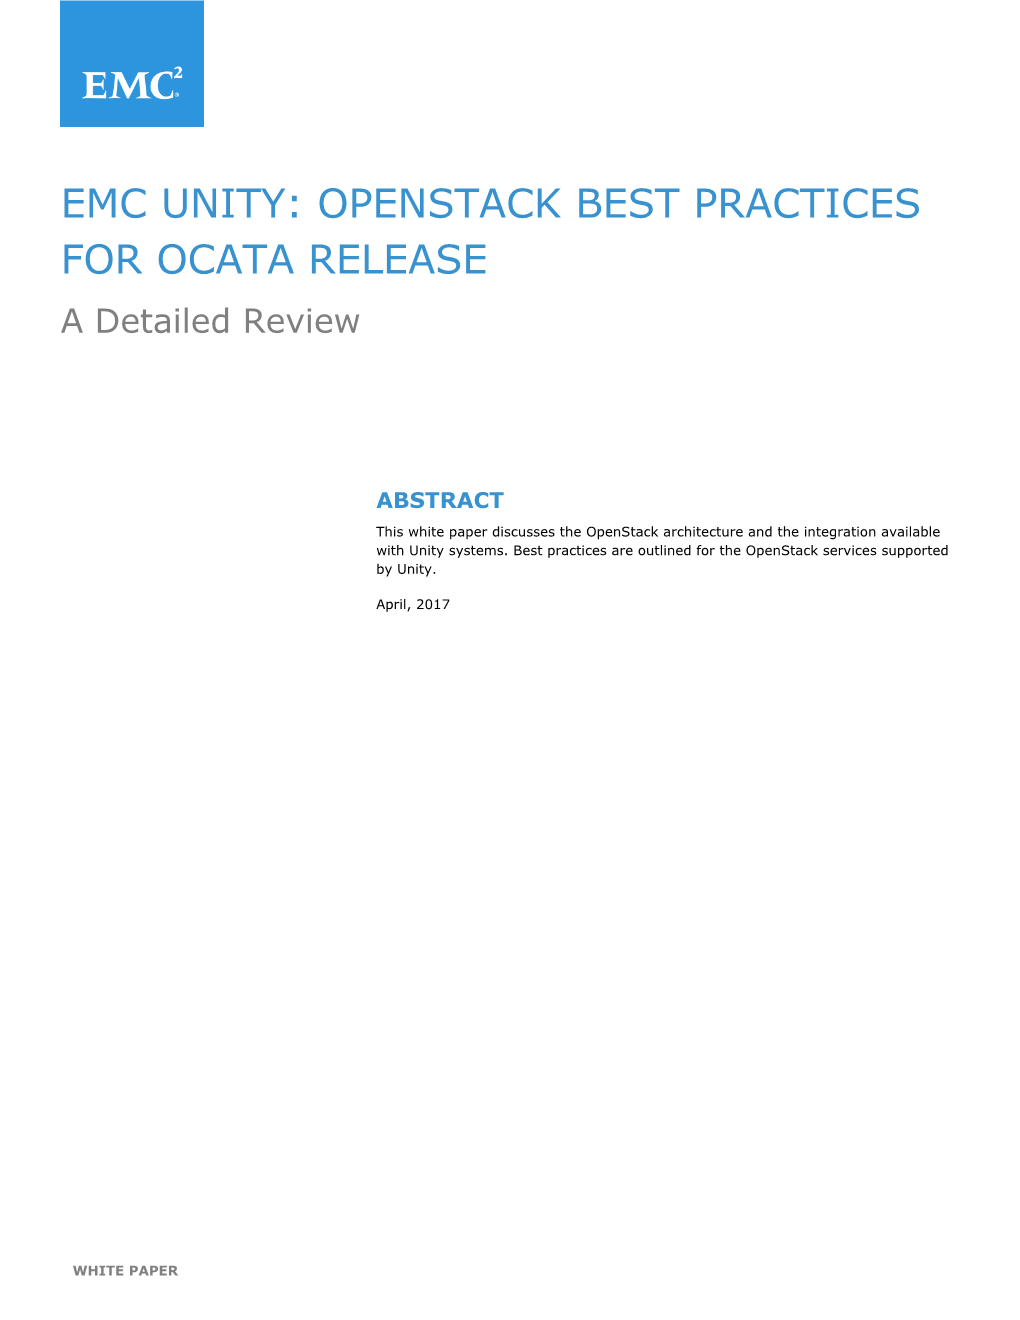 EMC UNITY: OPENSTACK BEST PRACTICES for OCATA RELEASE a Detailed Review